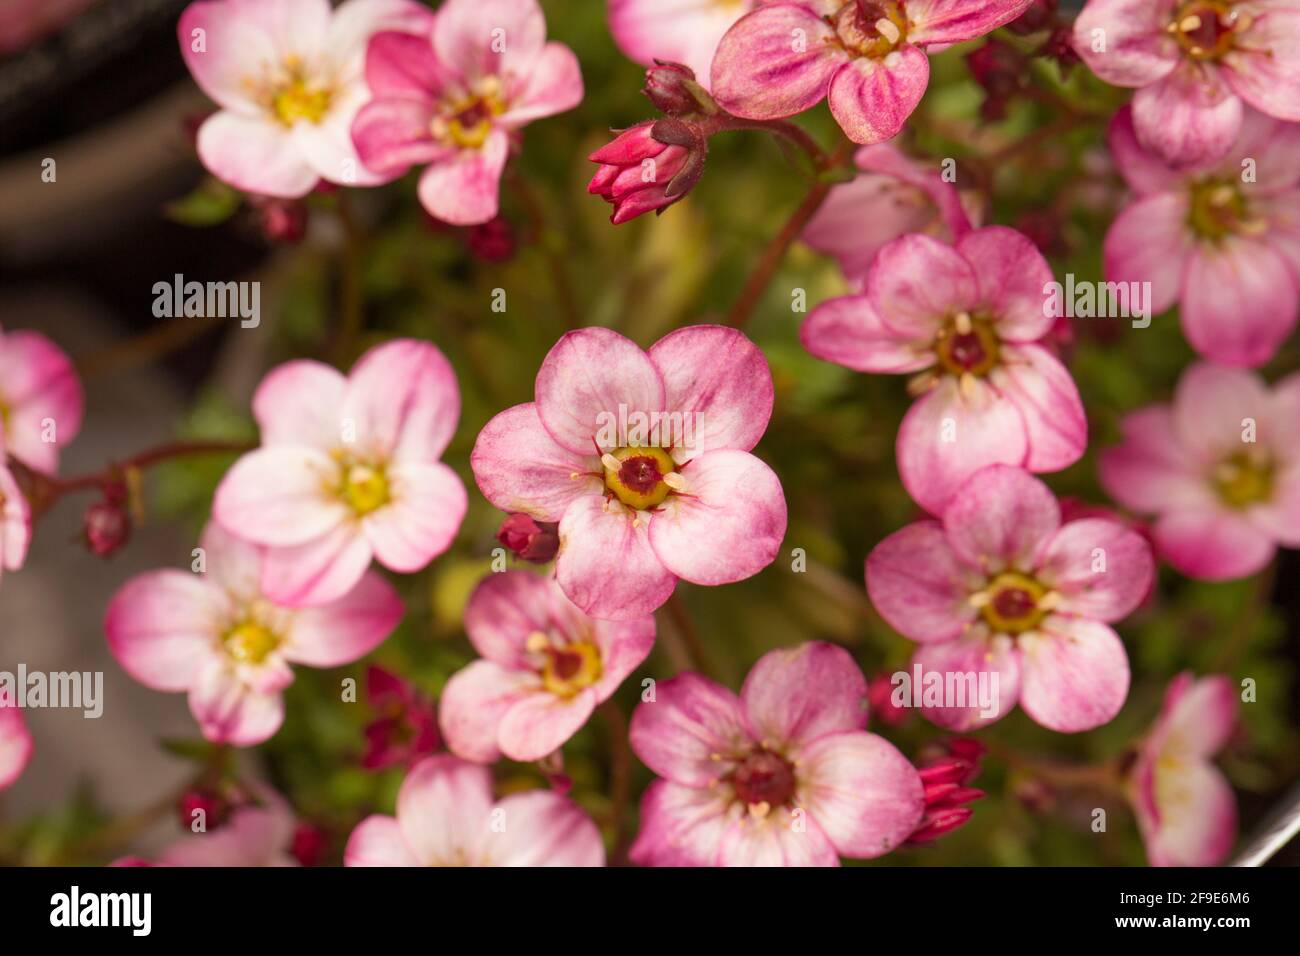 A flowering example of Mossy Saxifrage Alpino Early Picotee on display at a garden centre in early April. England UK GB Stock Photo